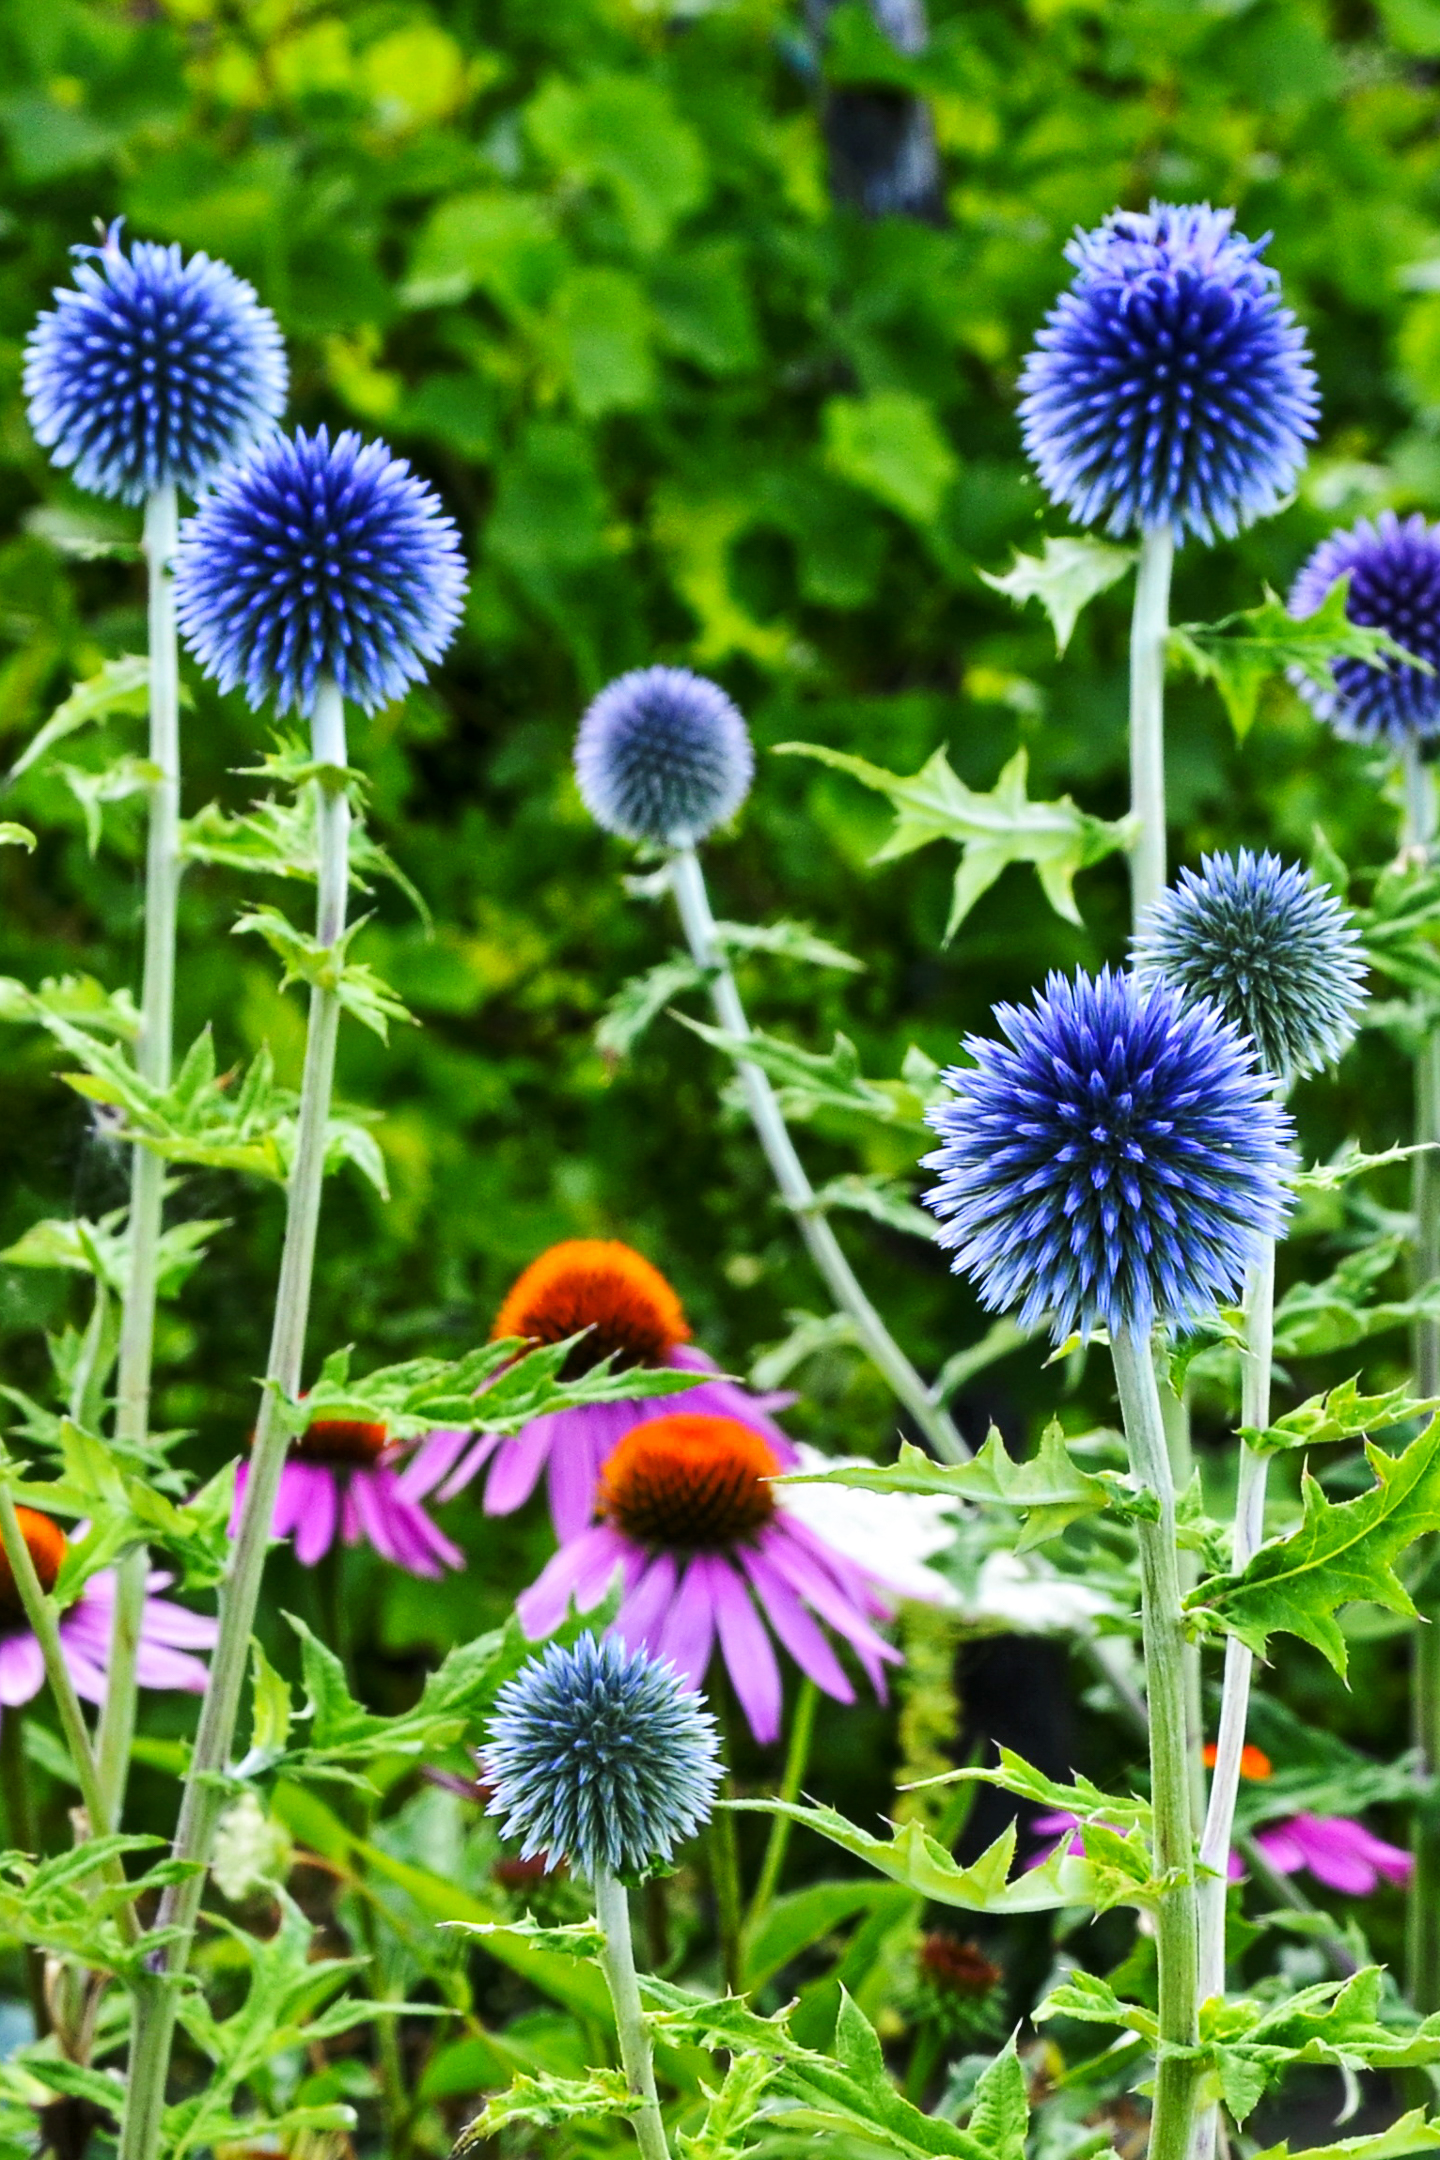 Blue globe thistle with pink coneflowers